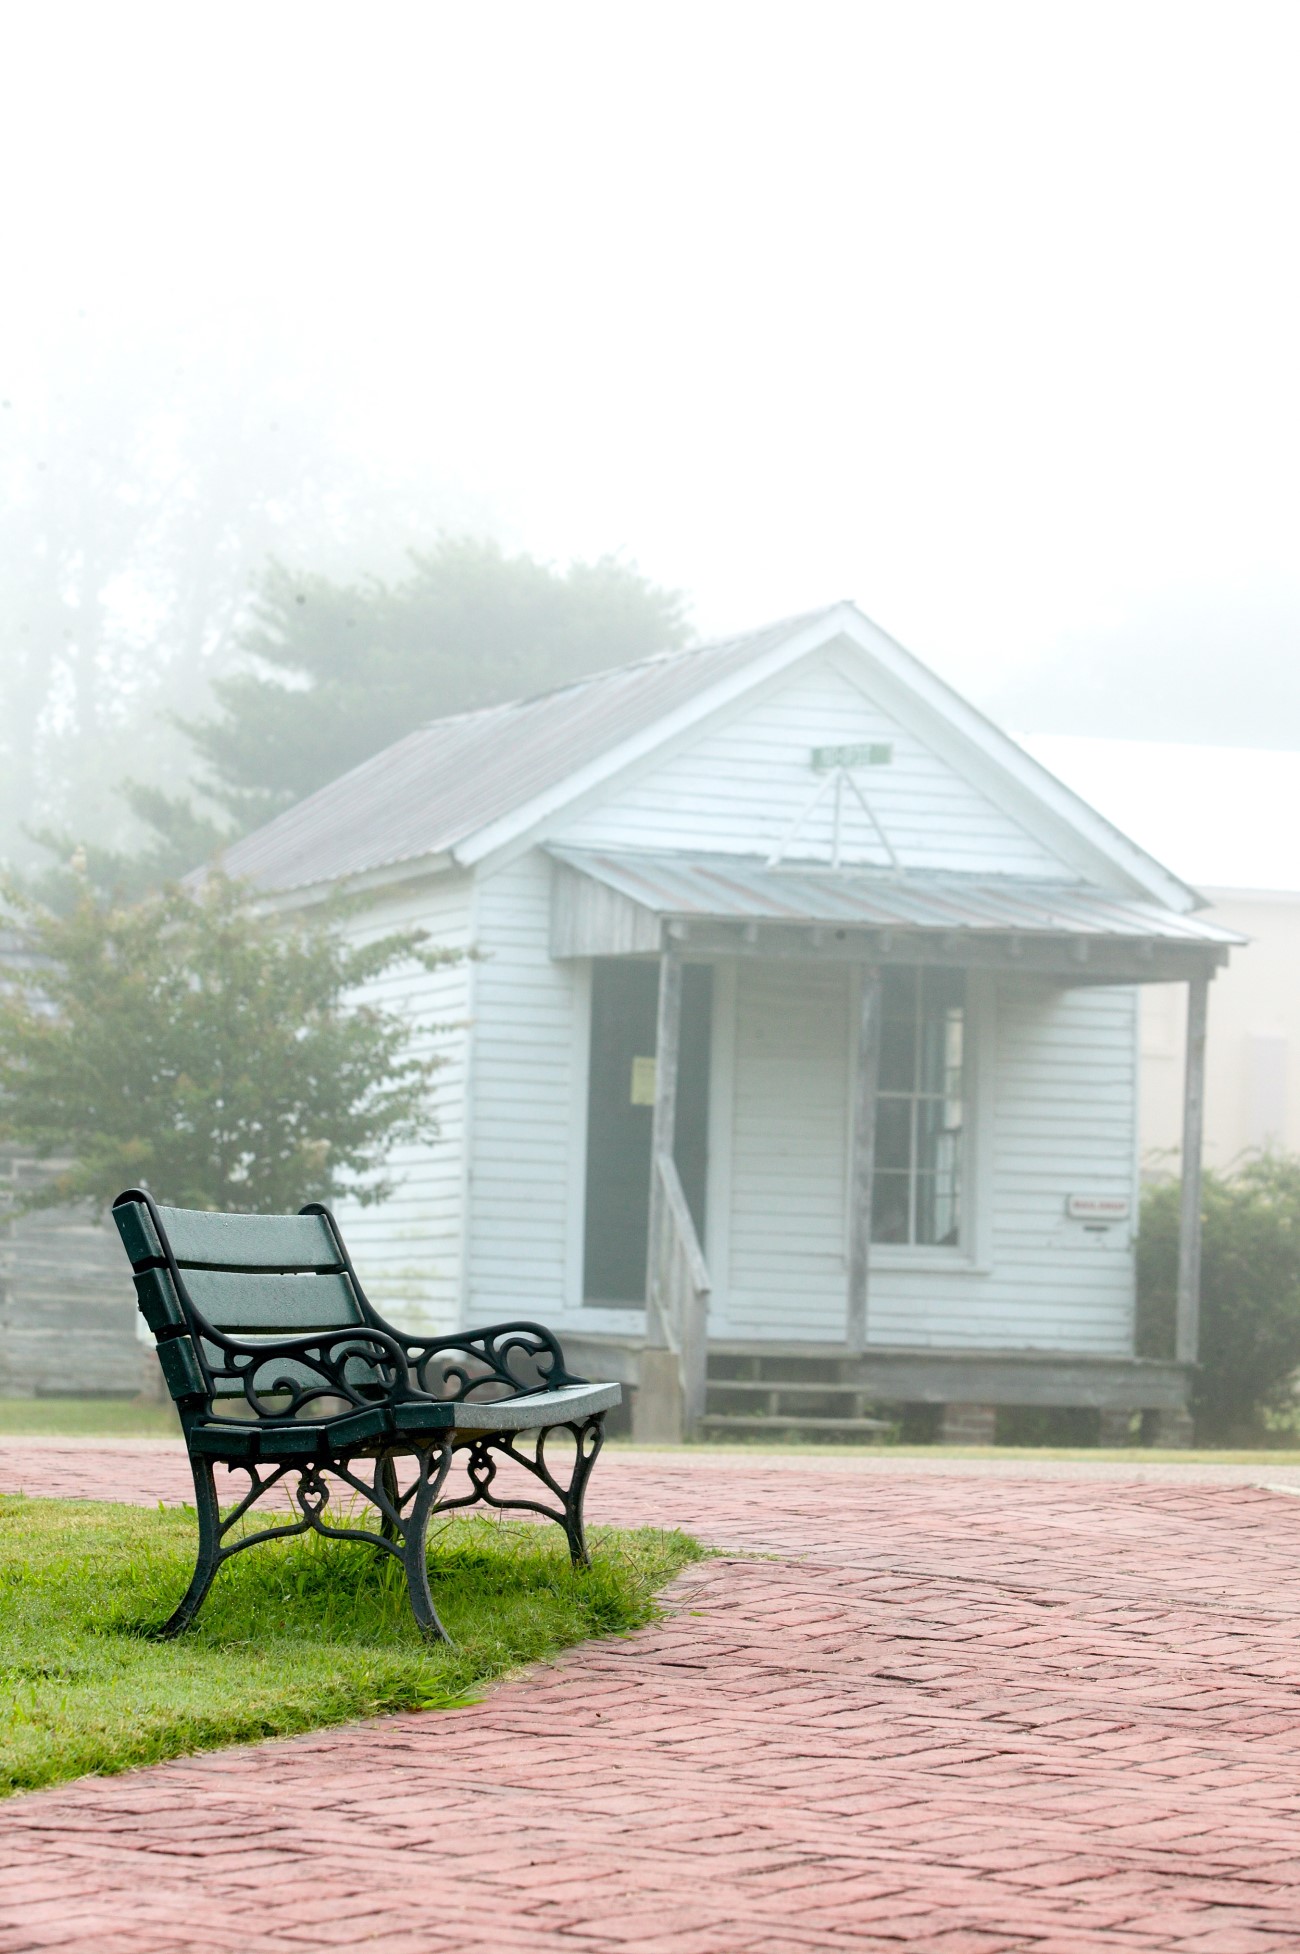 Historic Post Office in fog with metal bench on brick walkway